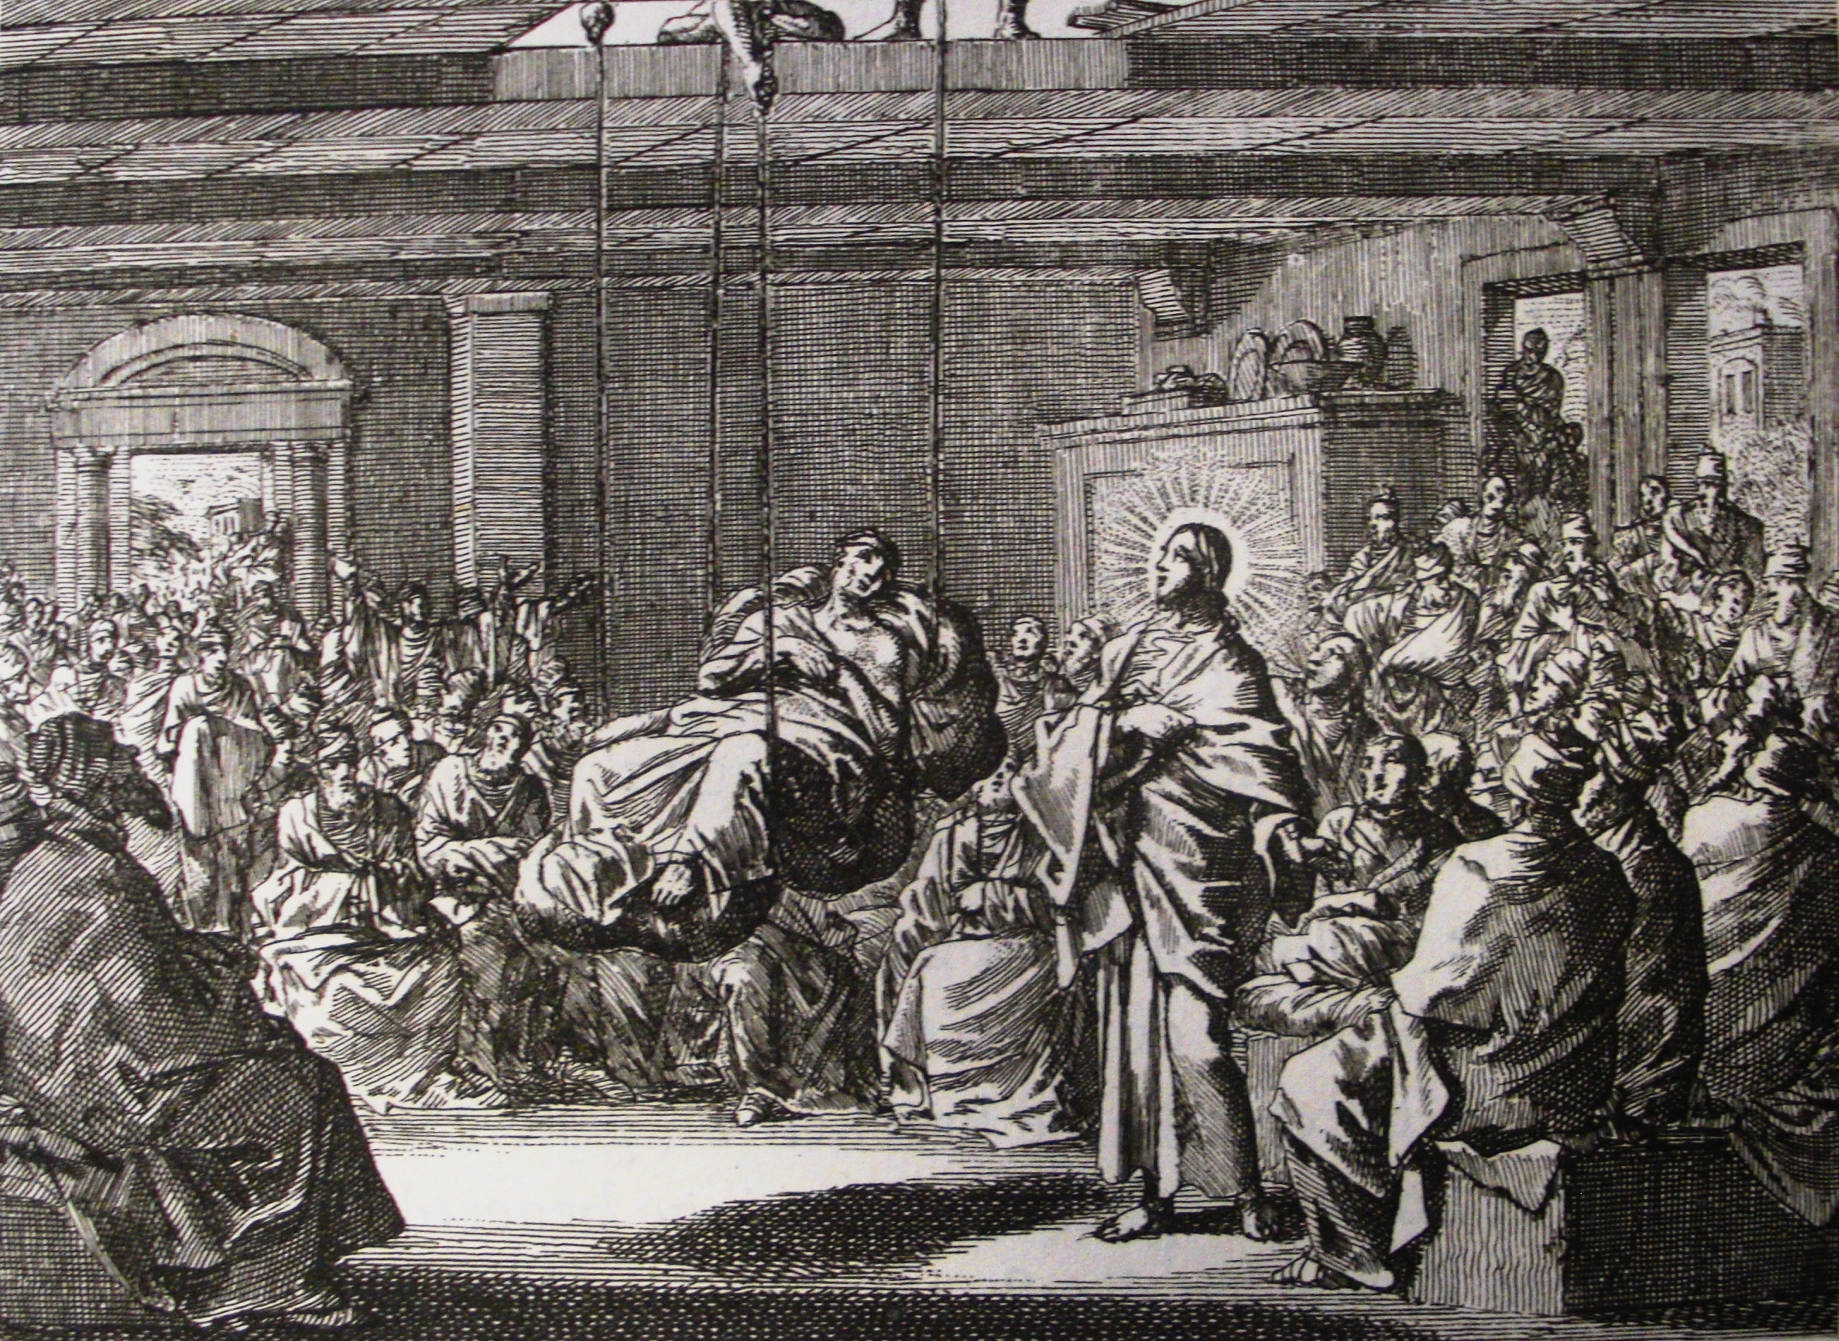 Jan_Luyken’s_Jesus_2._The_Paralytic_Lowered_through_the_Roof._Phillip_Medhurst_Collection